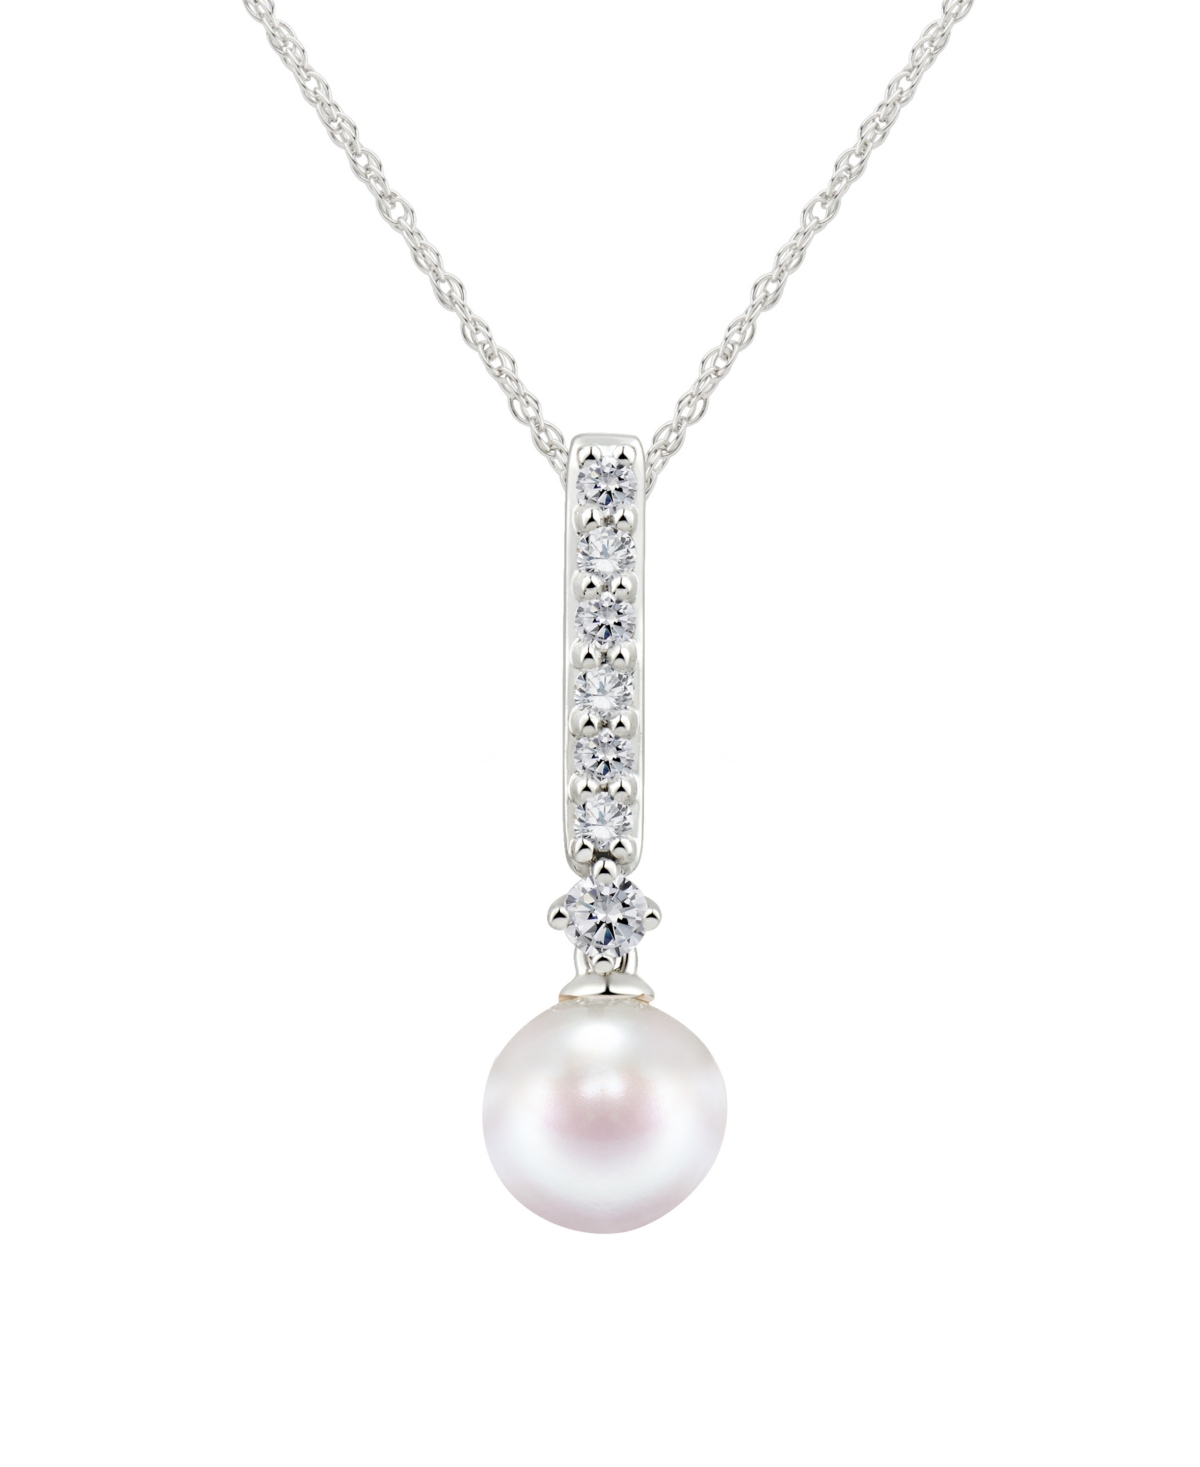 Honora Cultured Freshwater Pearl 7-7.5mm and Diamond 1/5 ct. tw. Pendant 18" Necklace in 14k White Gold (Also Available in 14k Yellow or 14k Rose Gold)